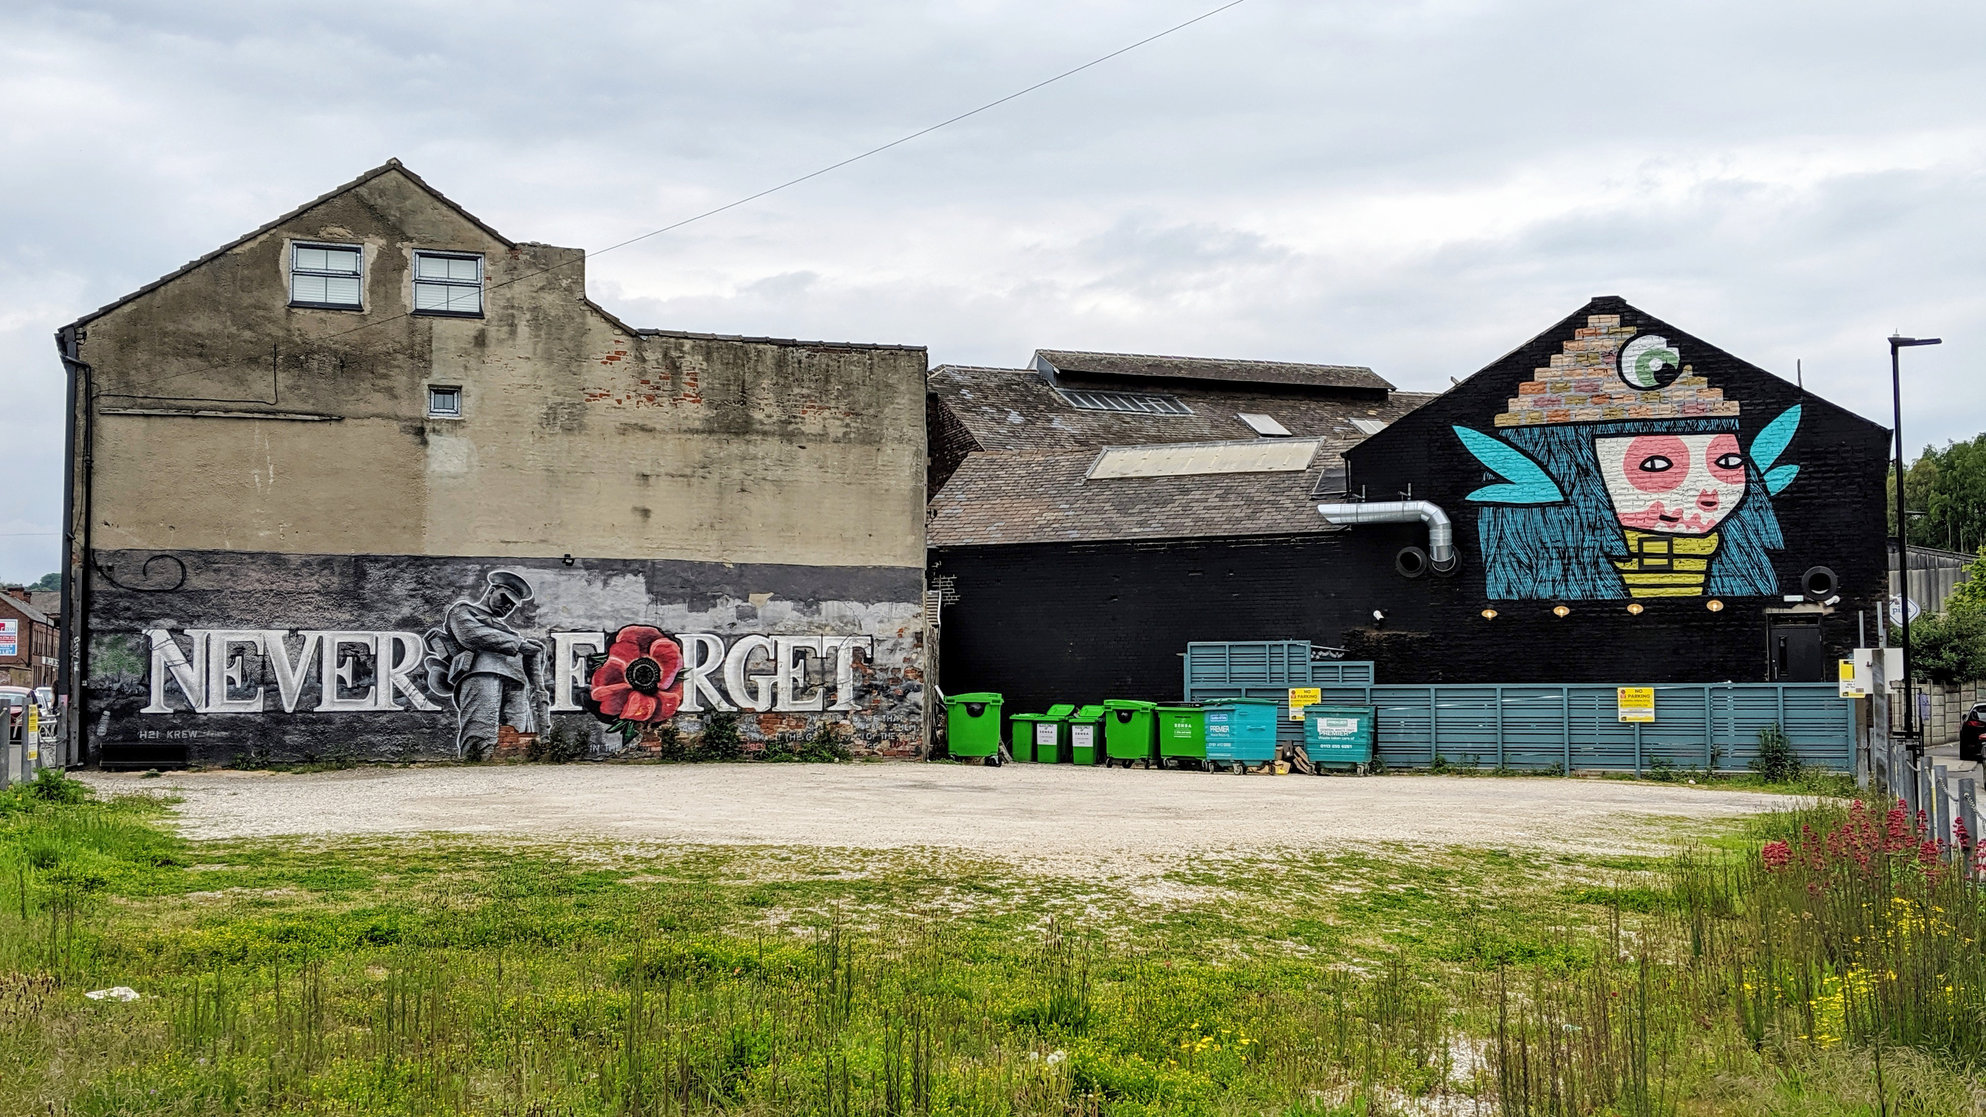 Two buildings in Neepsend, one with a mural remembering those lost to the World Wars, the other has artwork by Kid Acne